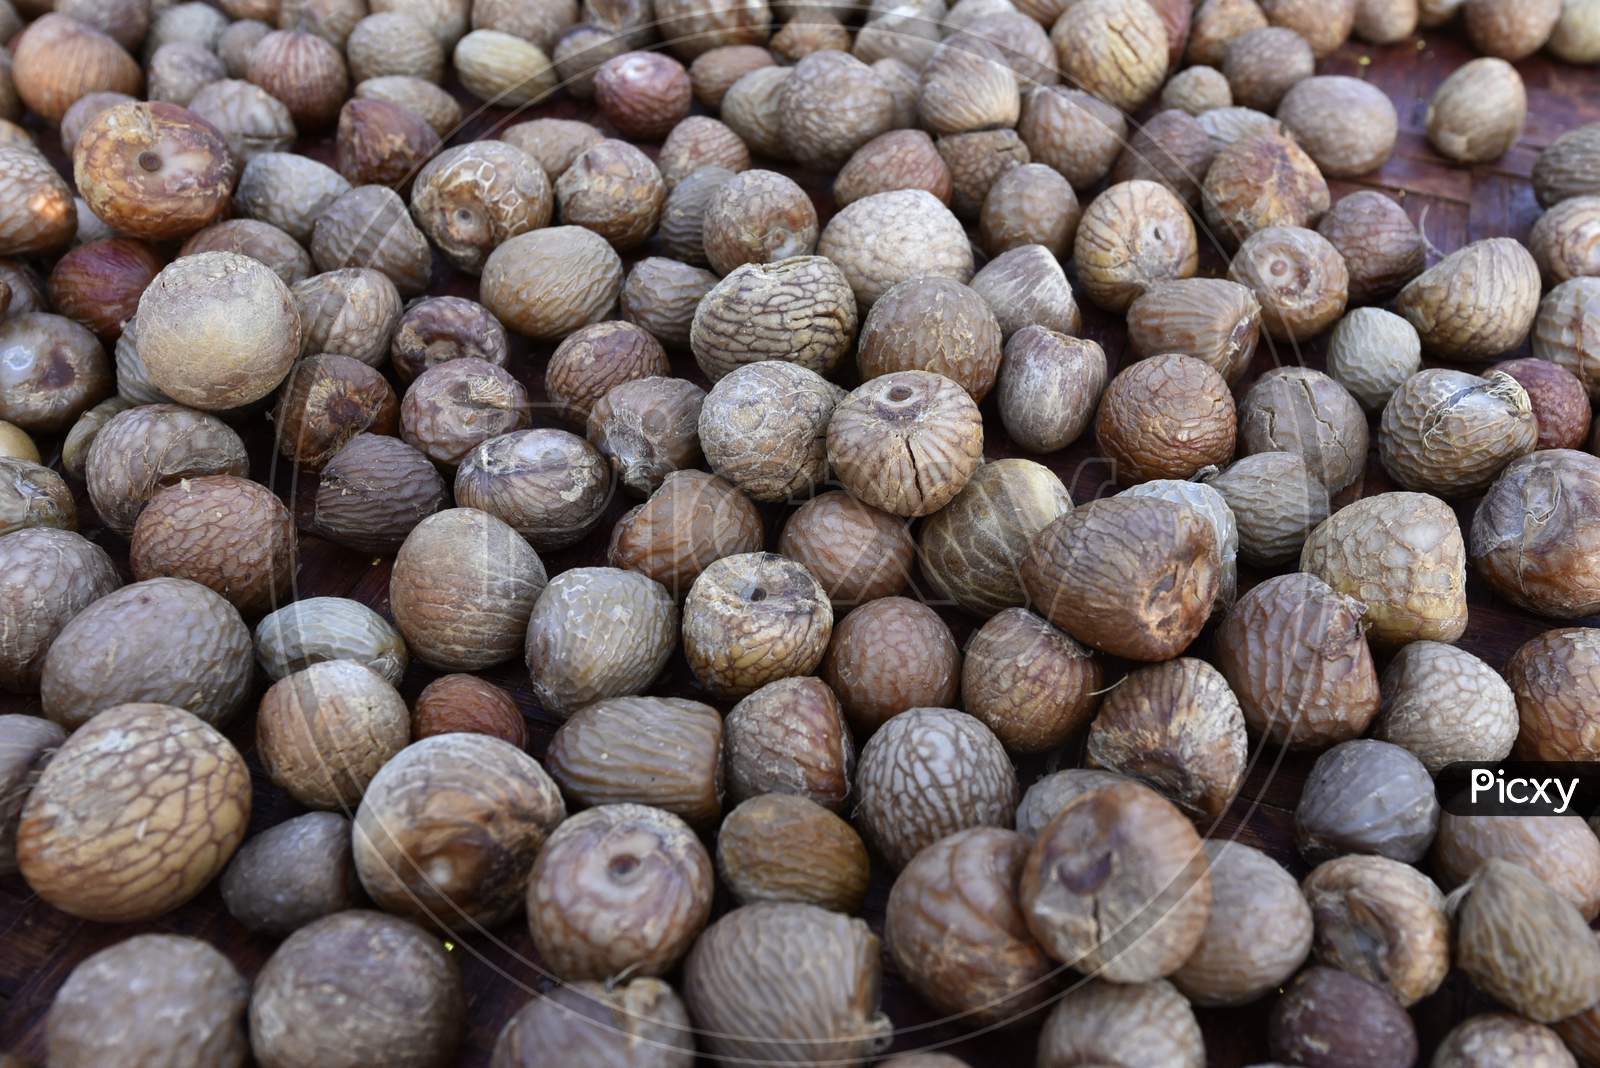 Pile Of  Dried Areca Nuts, Also Known As Betel Nuts Or Supari, At Howly In Barpeta District Of Assam.